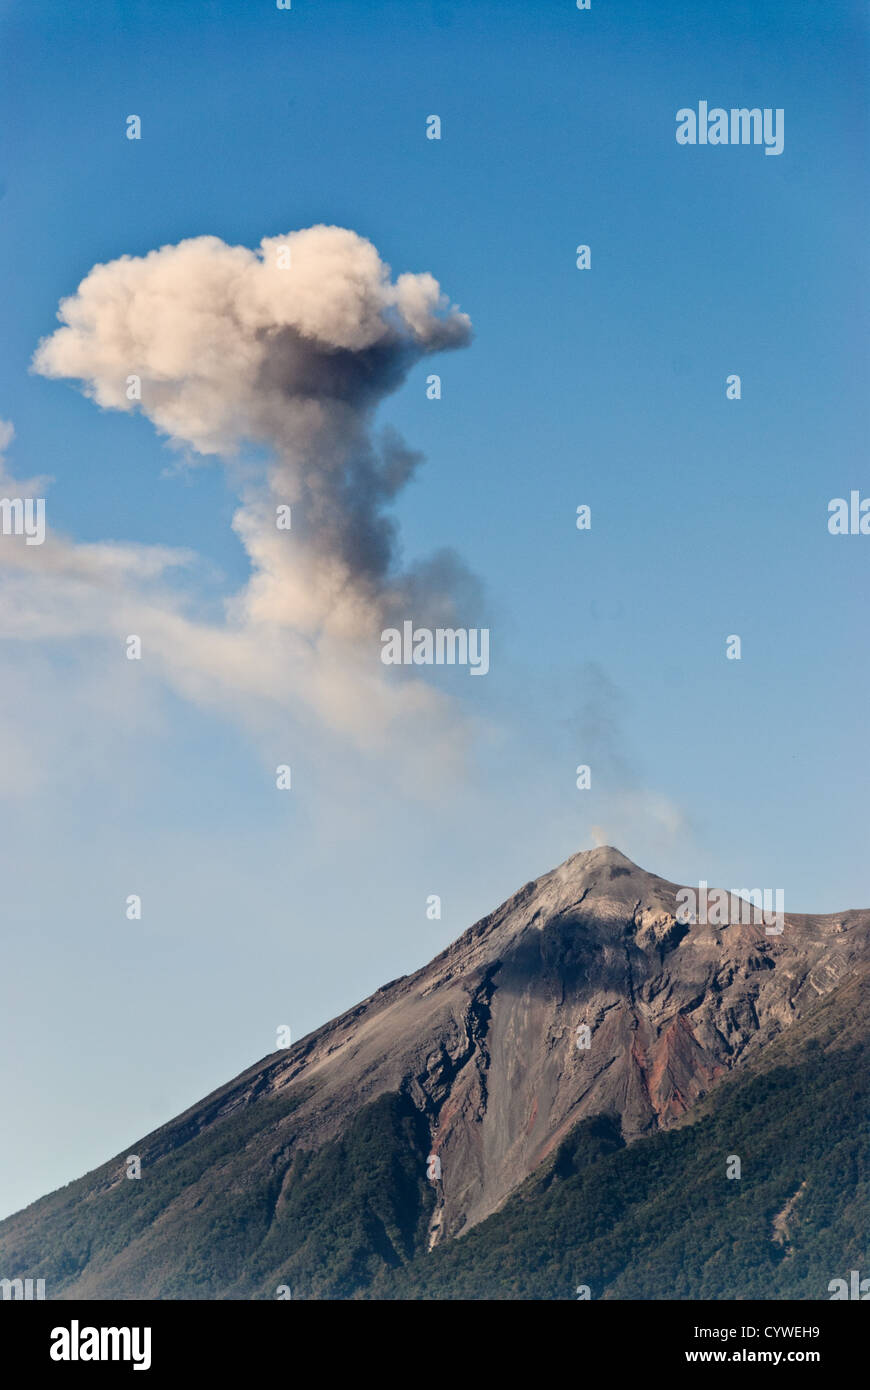 Volcán de Fuego emits a large puff of ash and smoke near Antigua Guatemala. Famous for its well-preserved Spanish baroque architecture as well as a number of ruins from earthquakes, Antigua Guatemala is a UNESCO World Heritage Site and former capital of Guatemala. Stock Photo